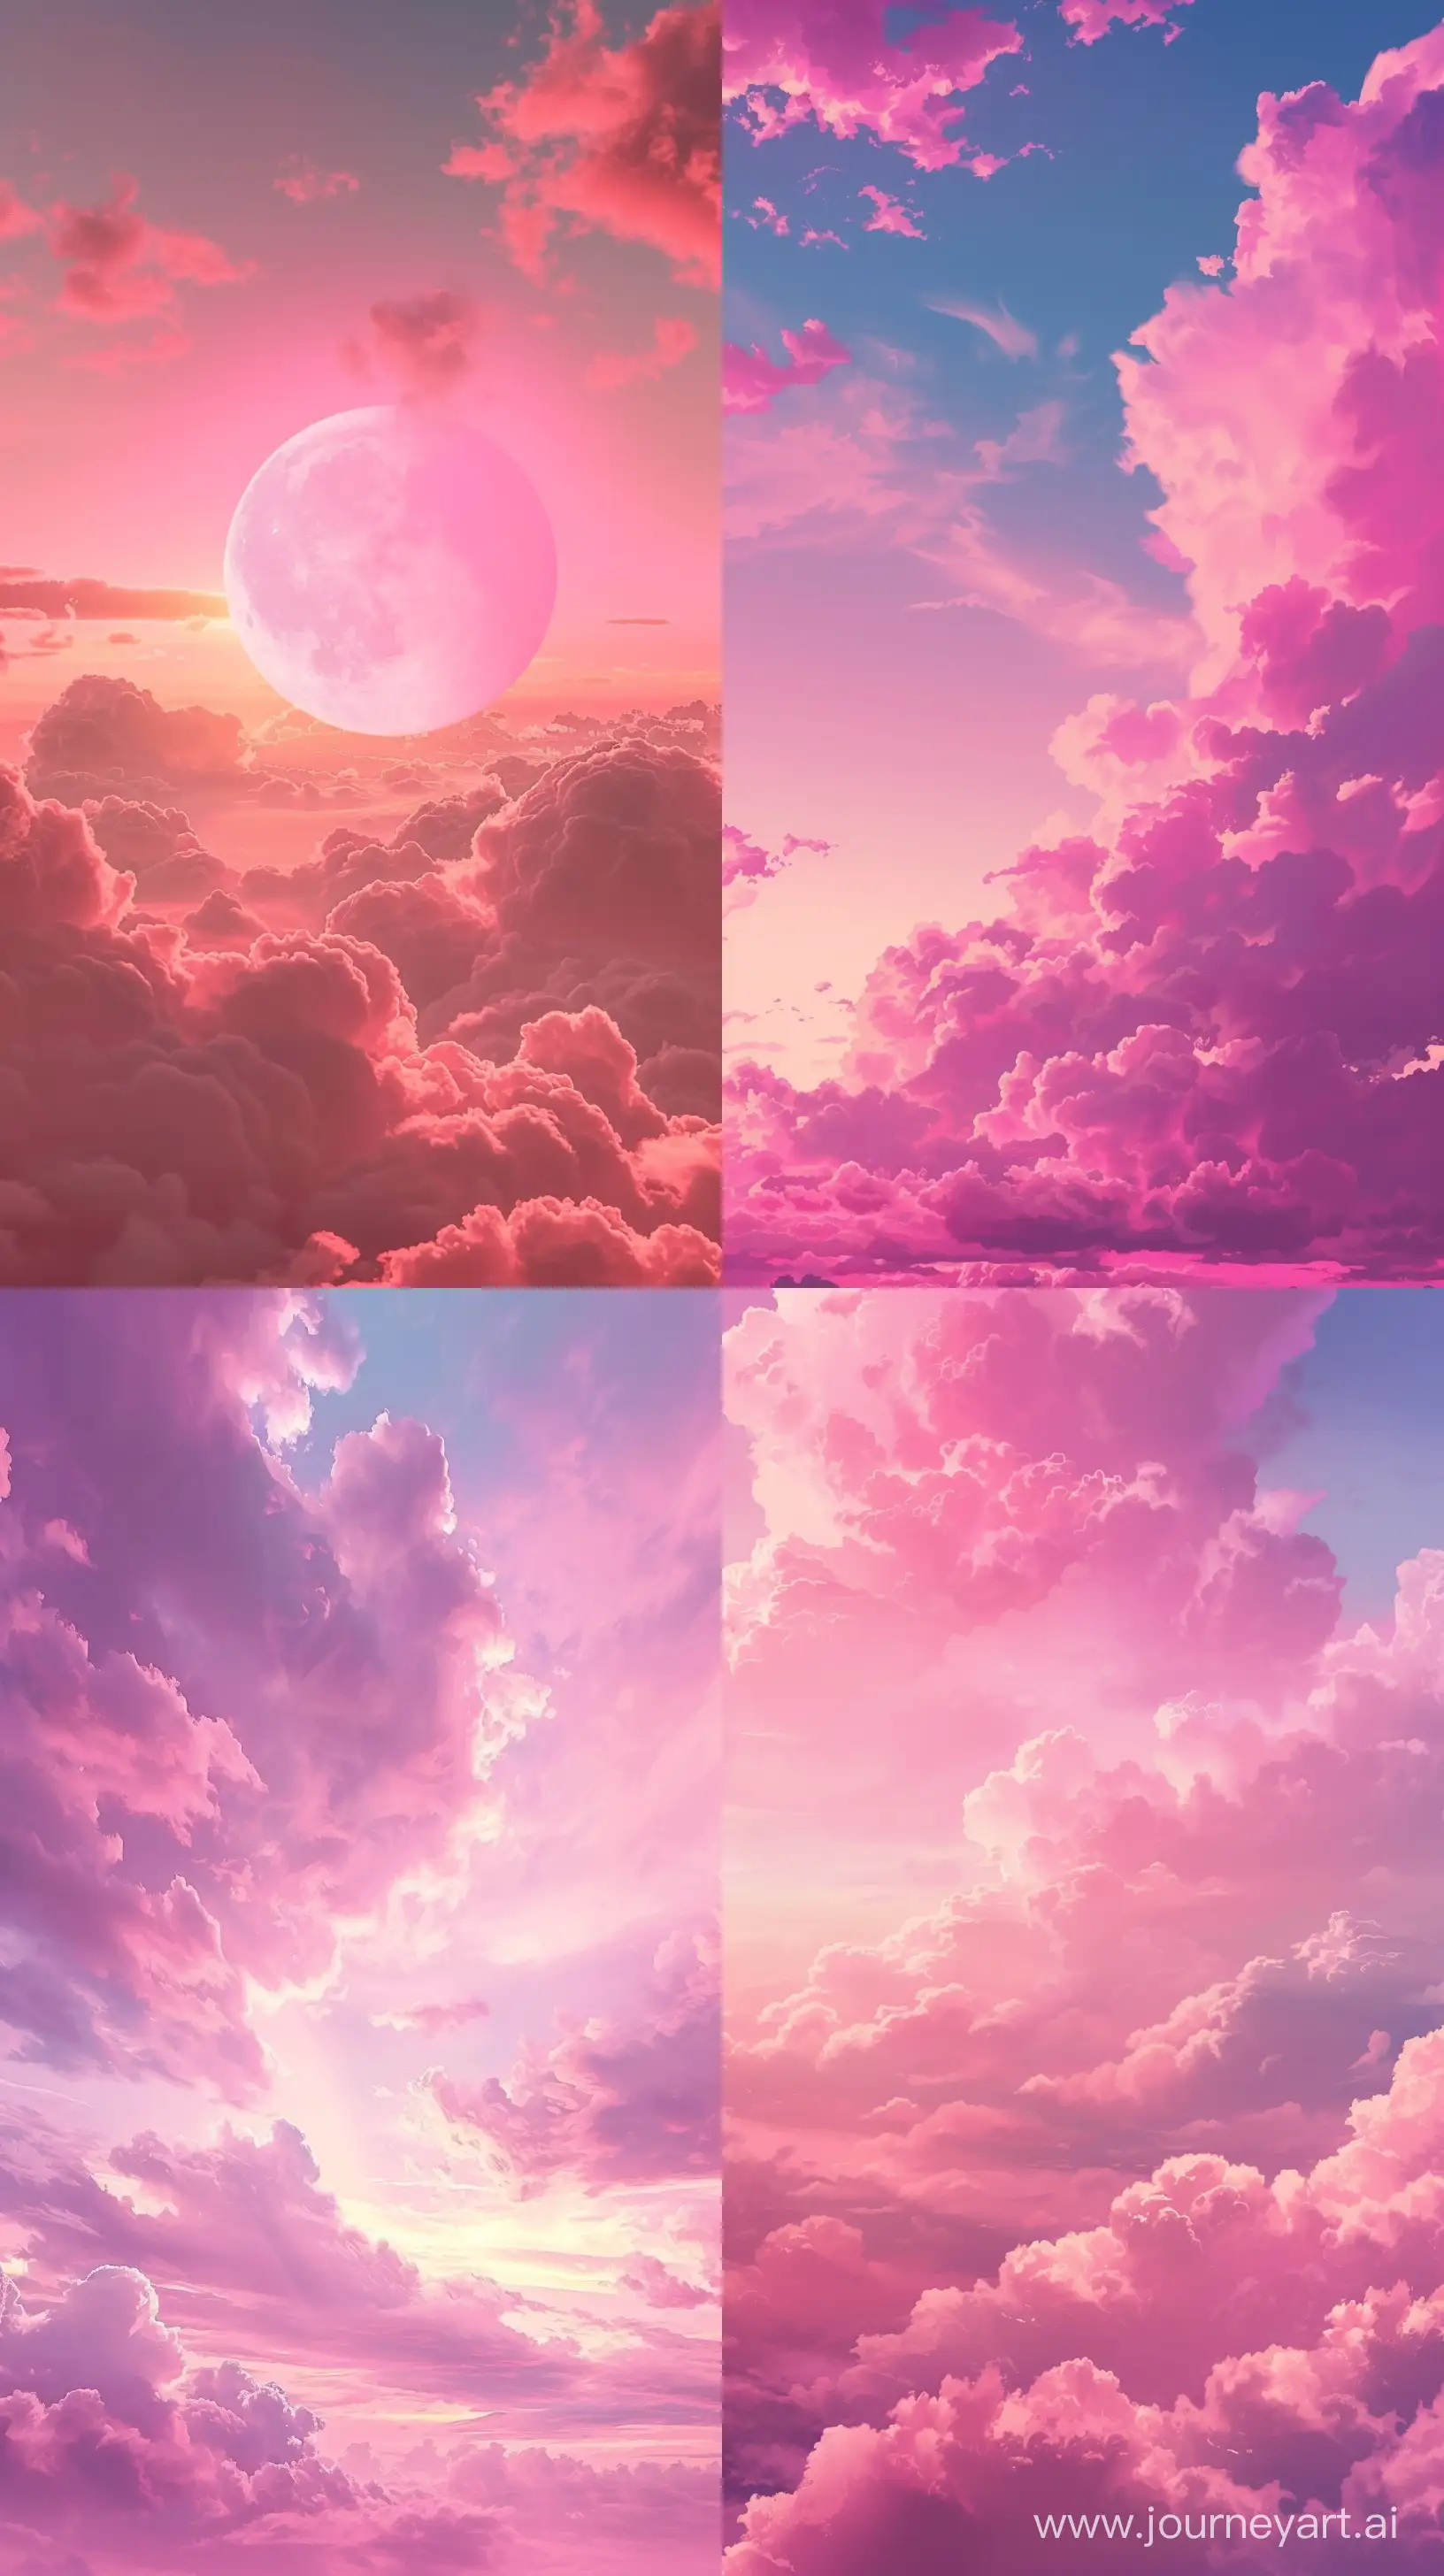 Surreal-Pink-Sky-Landscape-with-Realistic-Art-Style